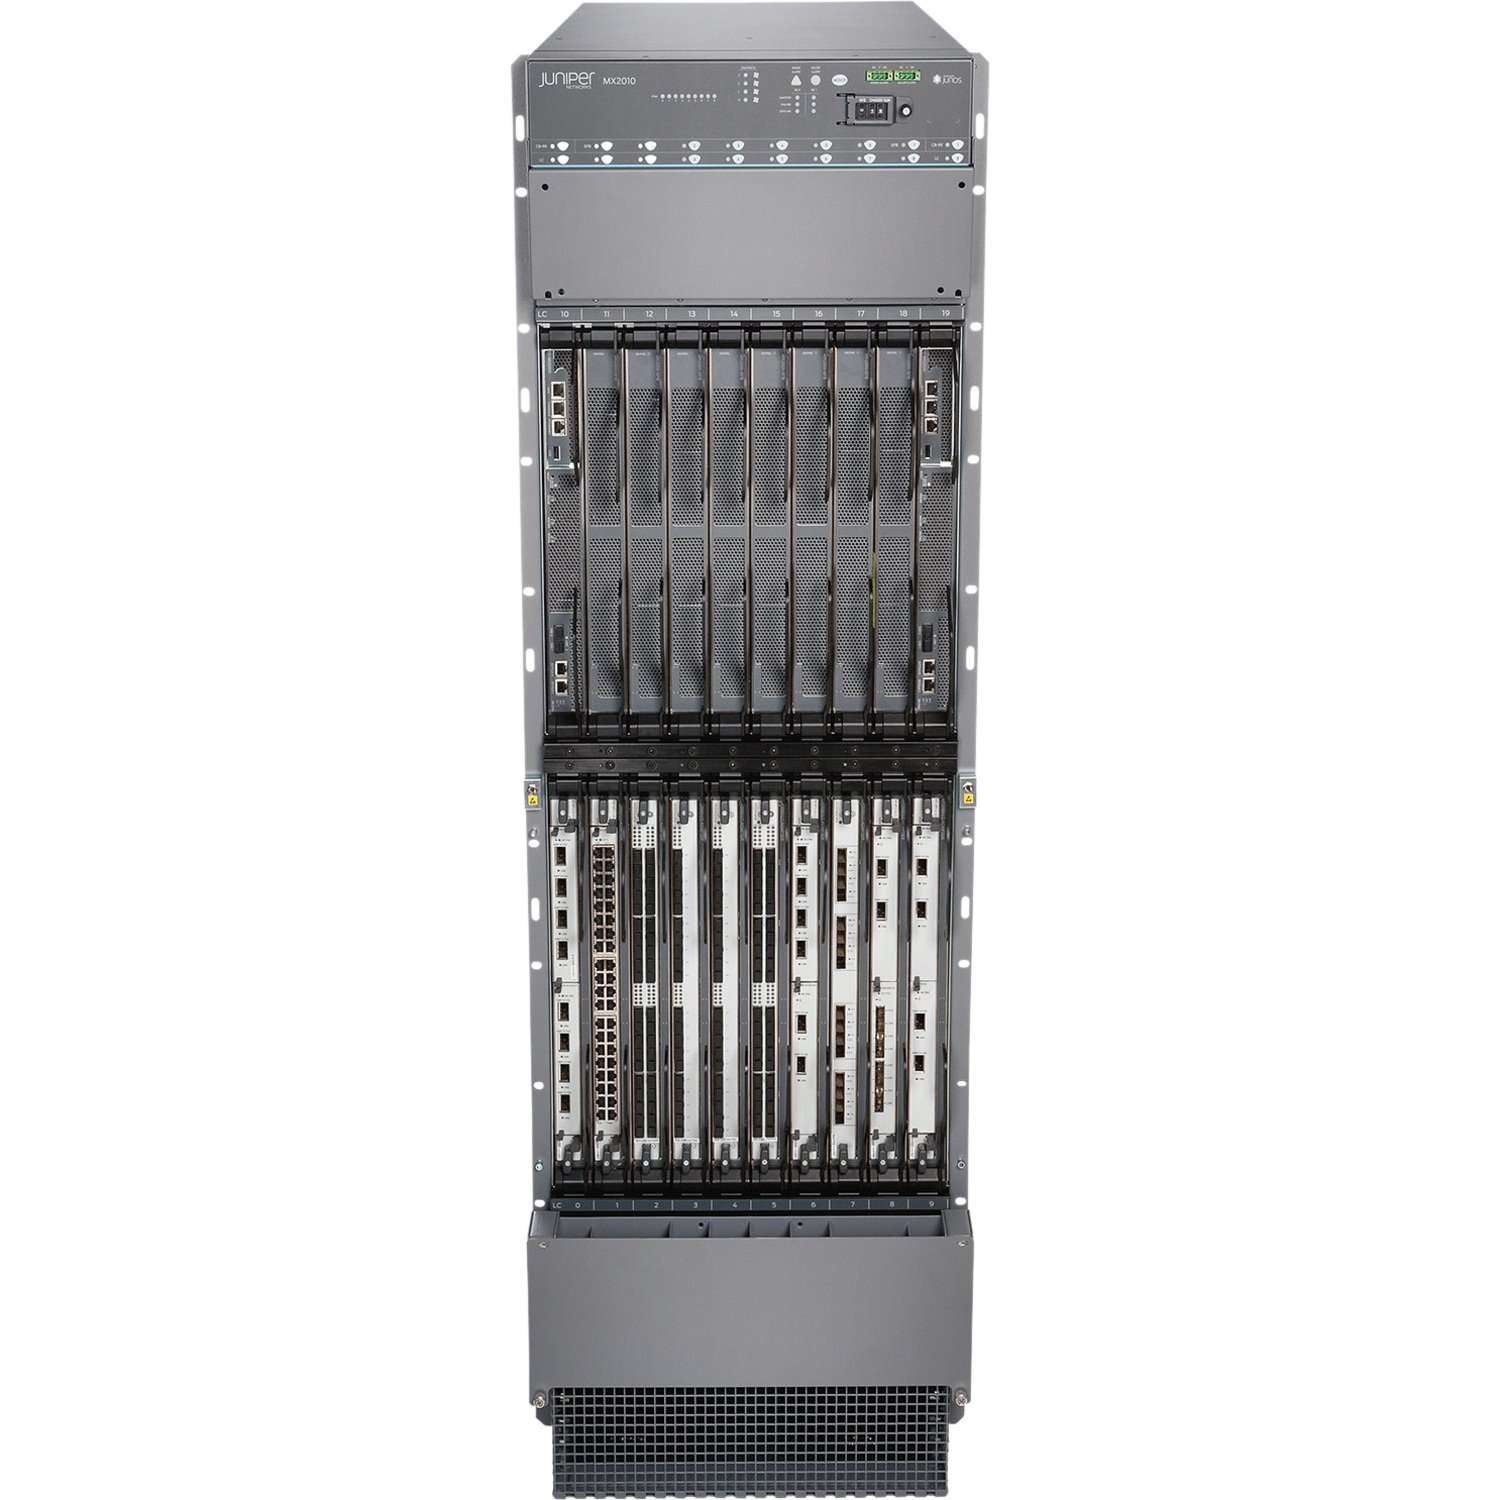 Juniper MX2010 Router Chassis